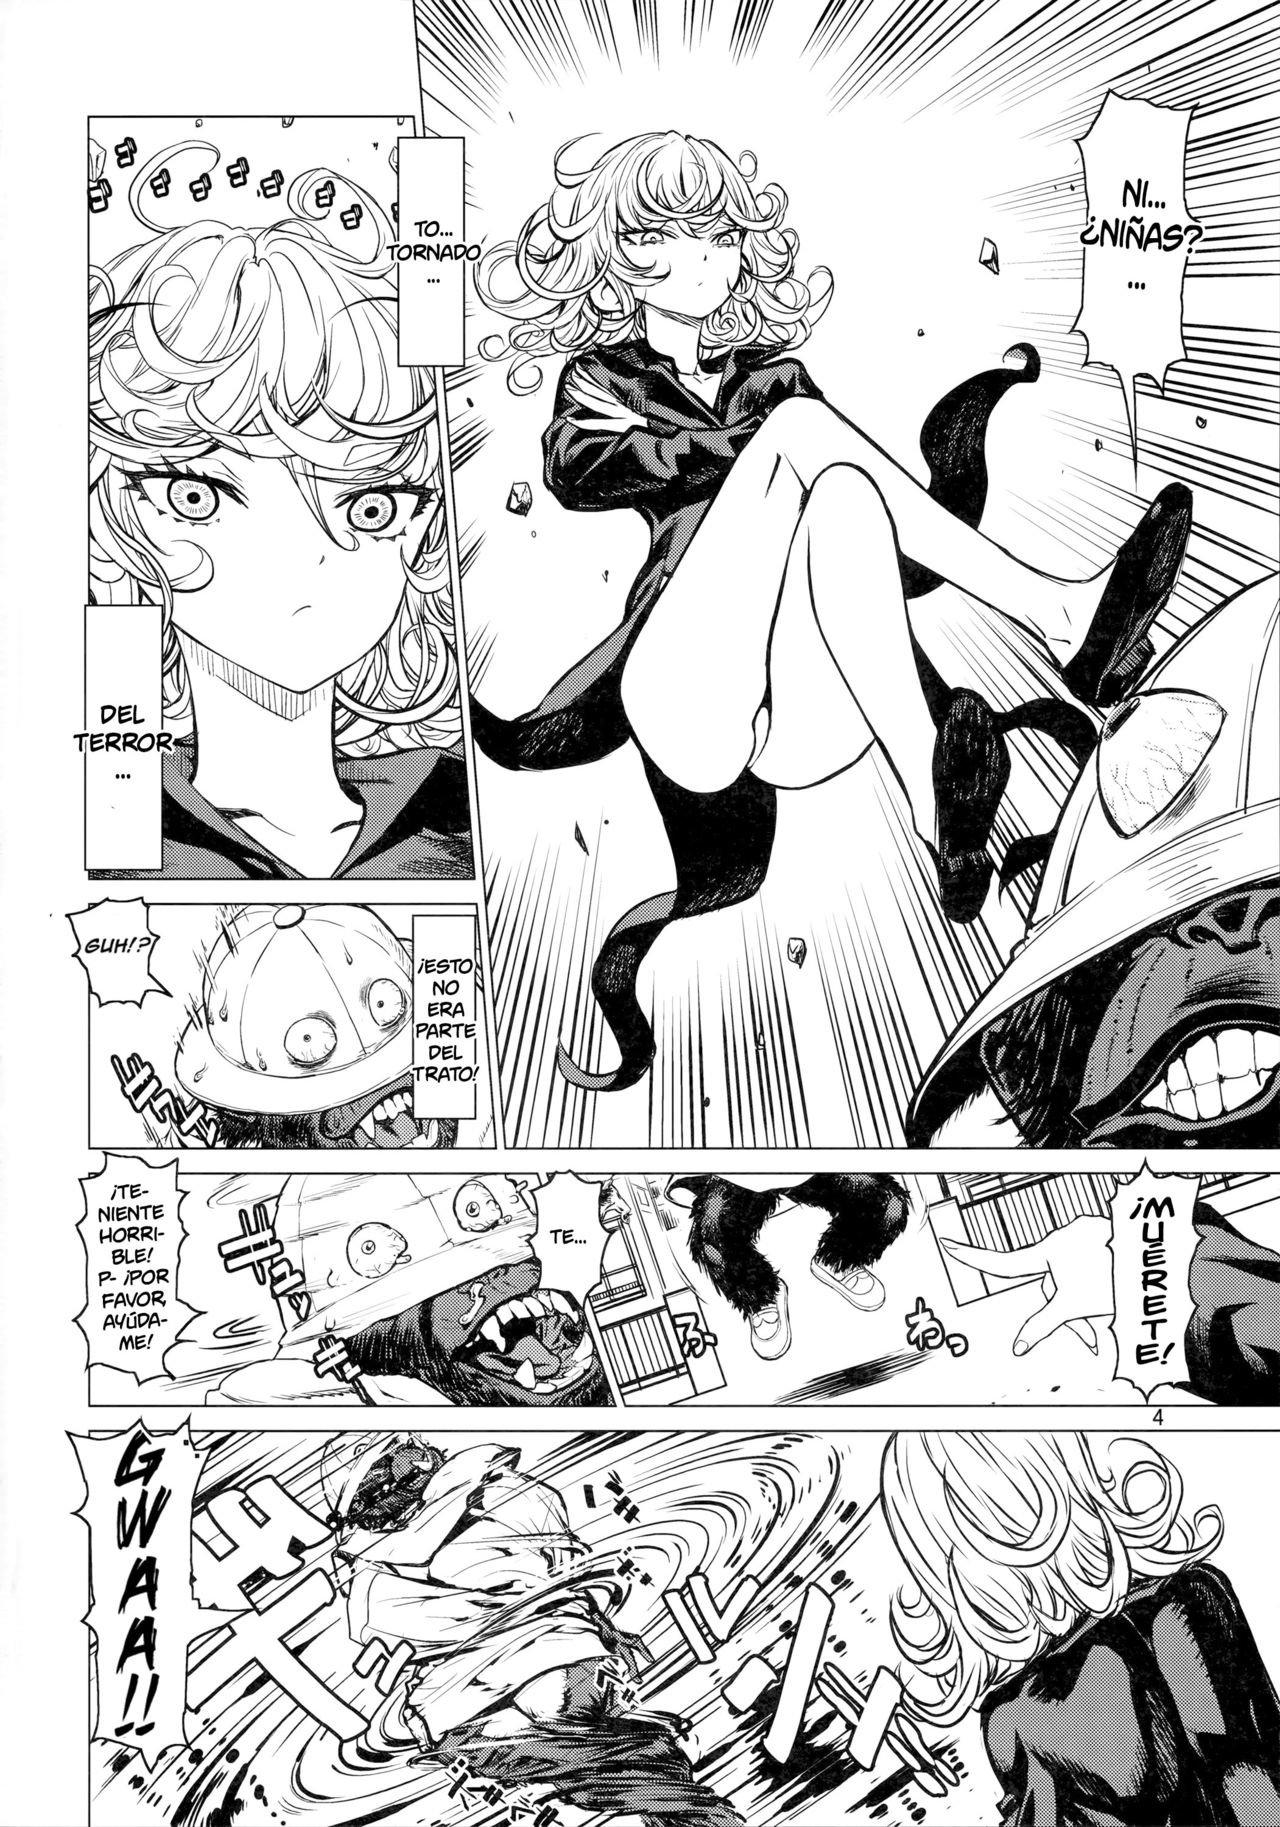 Disaster Sisters Leopard Hon 25 (One Punch Man) [Spanish] [NILG] - 2